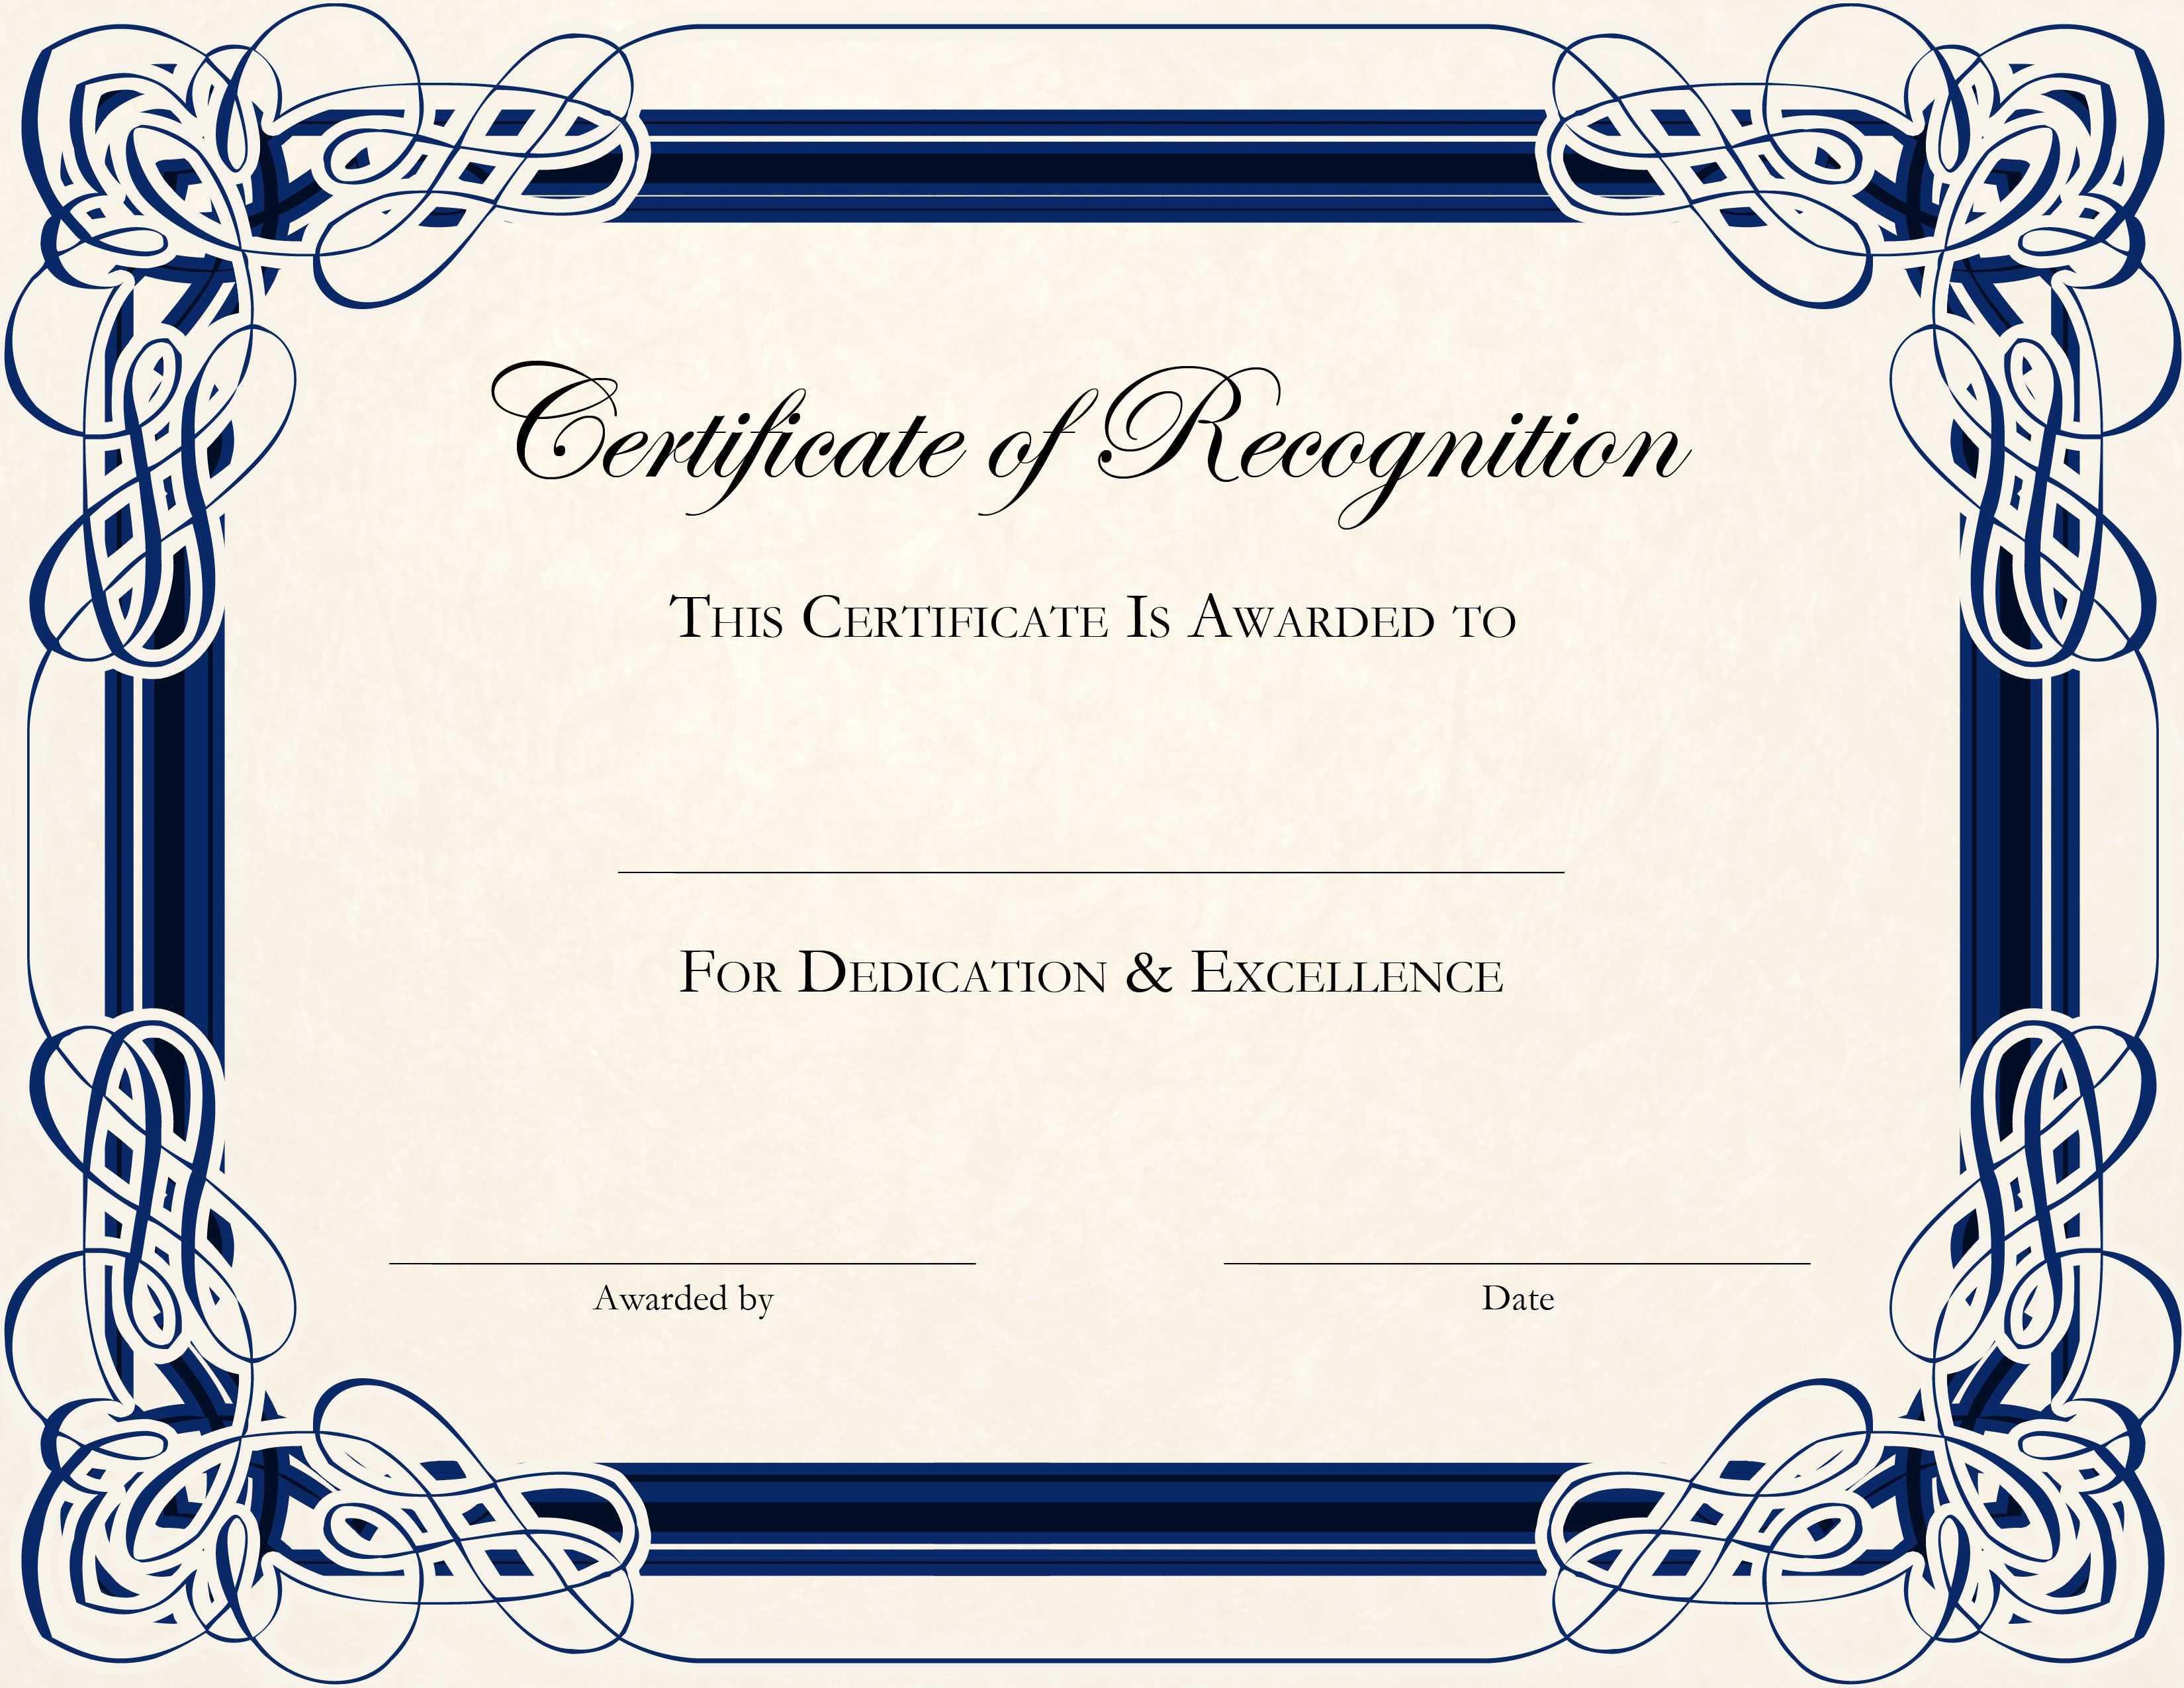 Certificate Template Designs Recognition Docs | Blankets With Regard To Template For Certificate Of Award